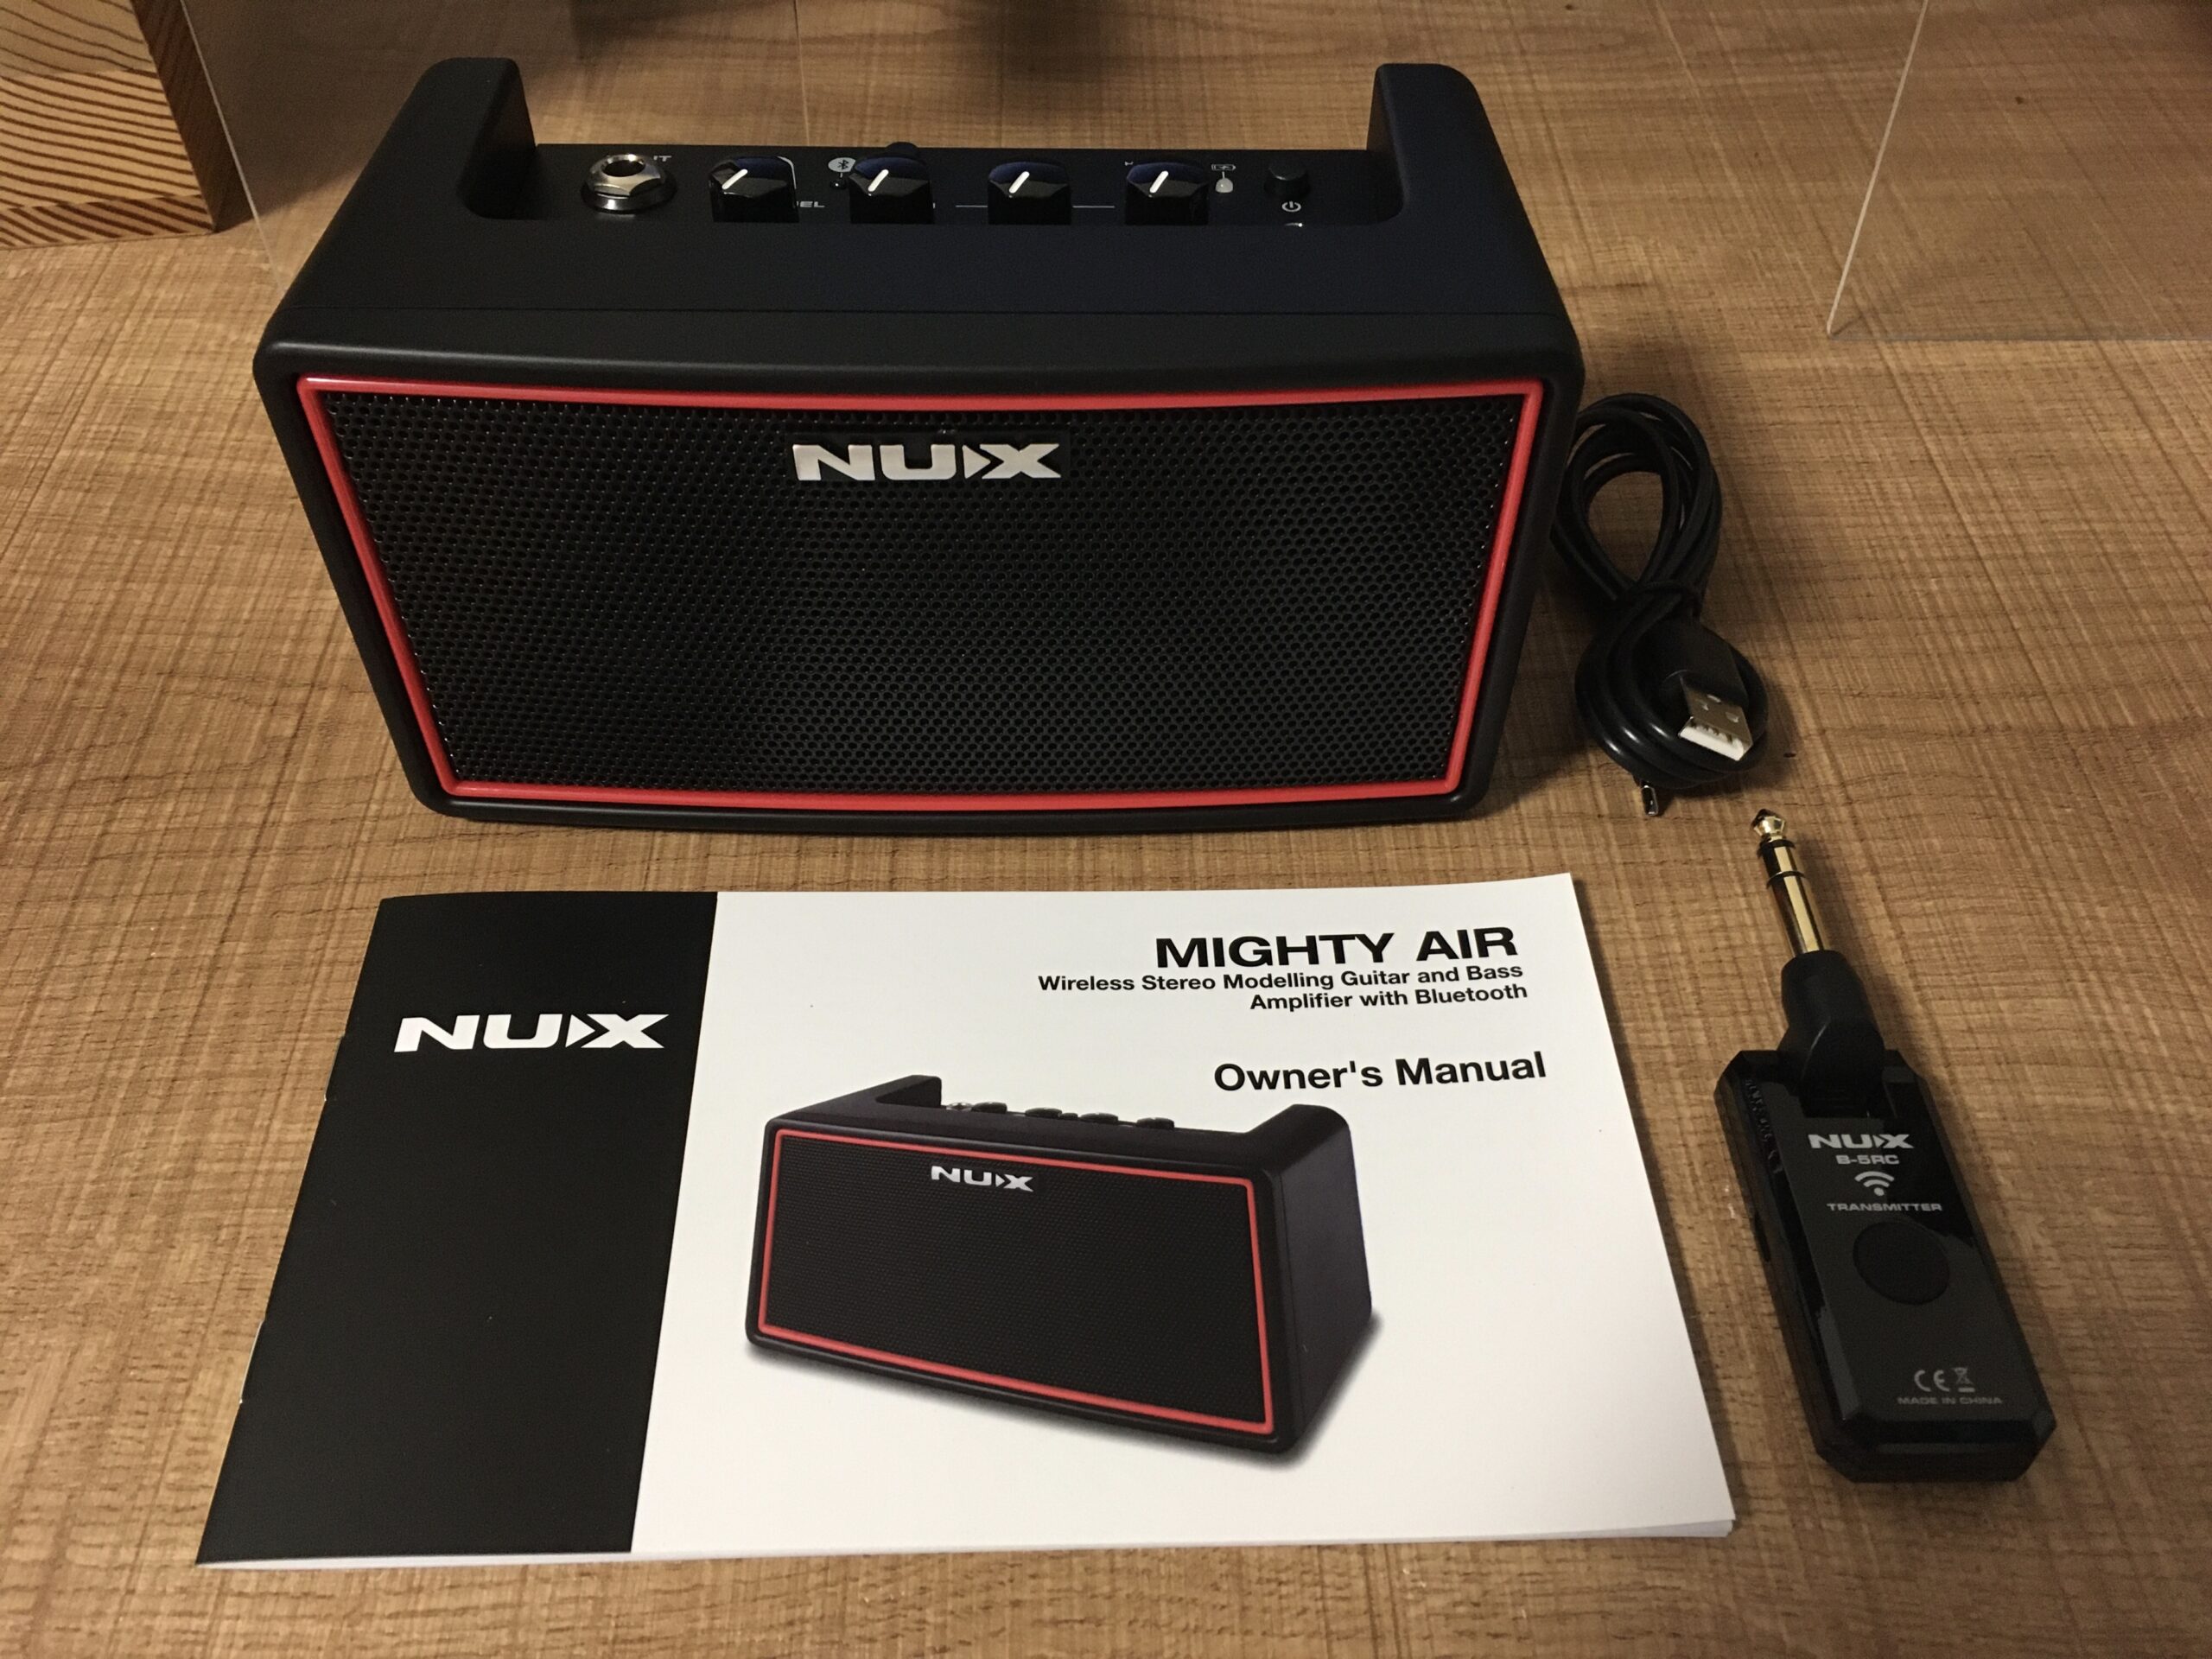 NUX mighty air ギターアンプ | linnke.com.br